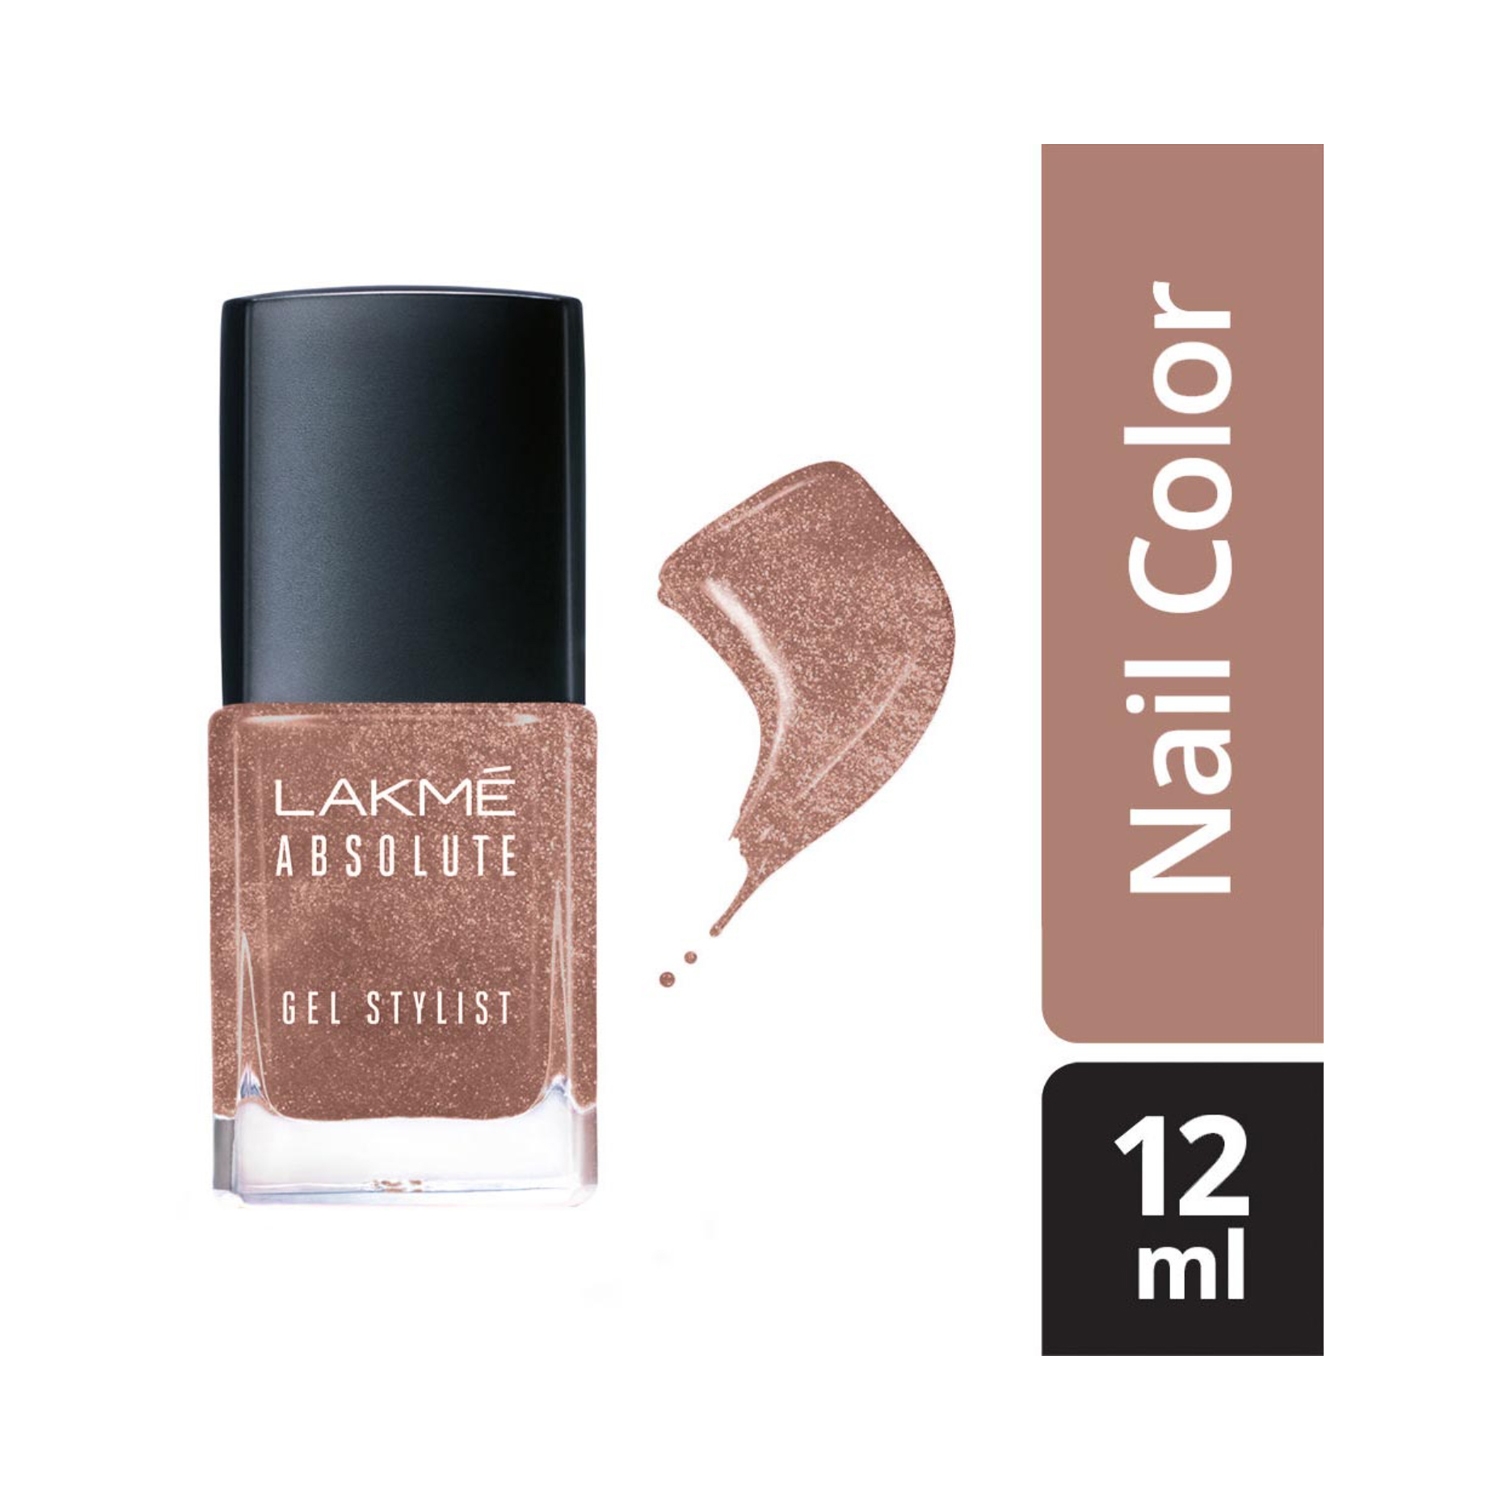 Lakme | Lakme Absolute Gel Stylist Nail Color - Cheers (12ml)